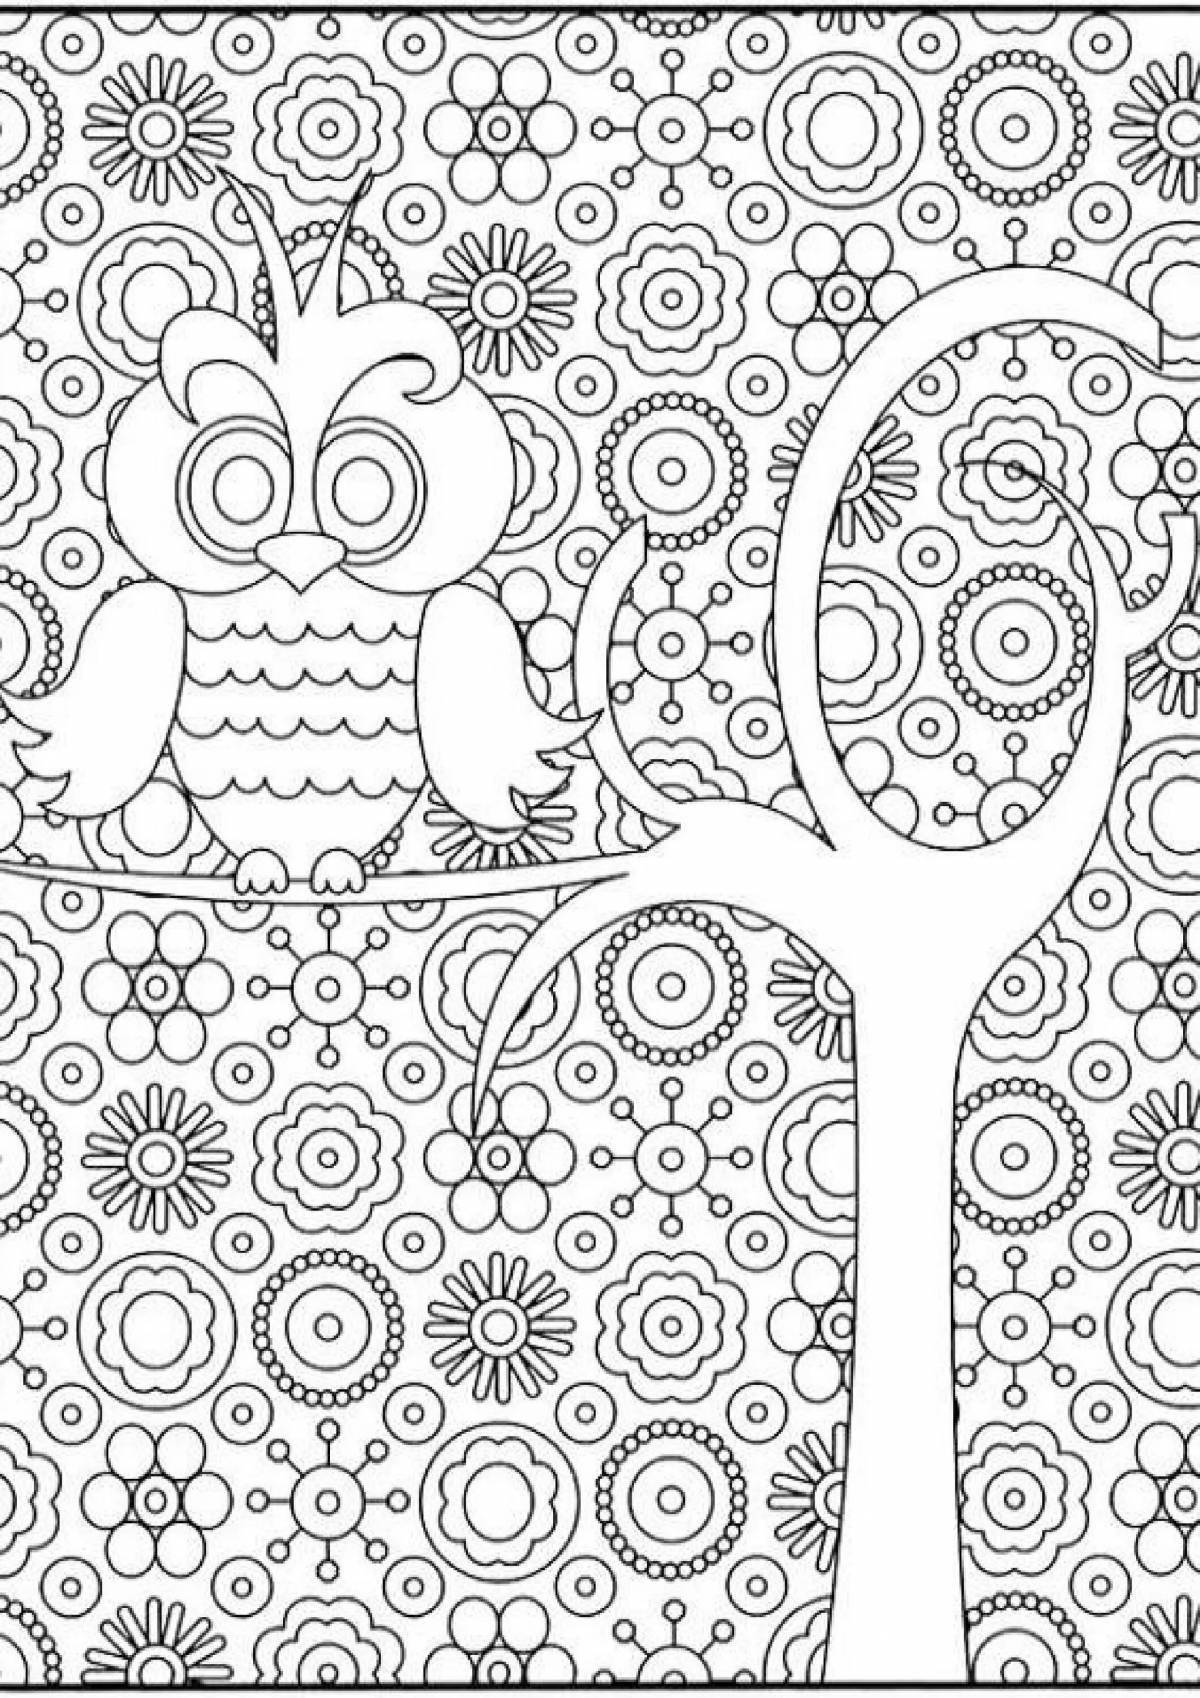 Adorable little coloring book for girls